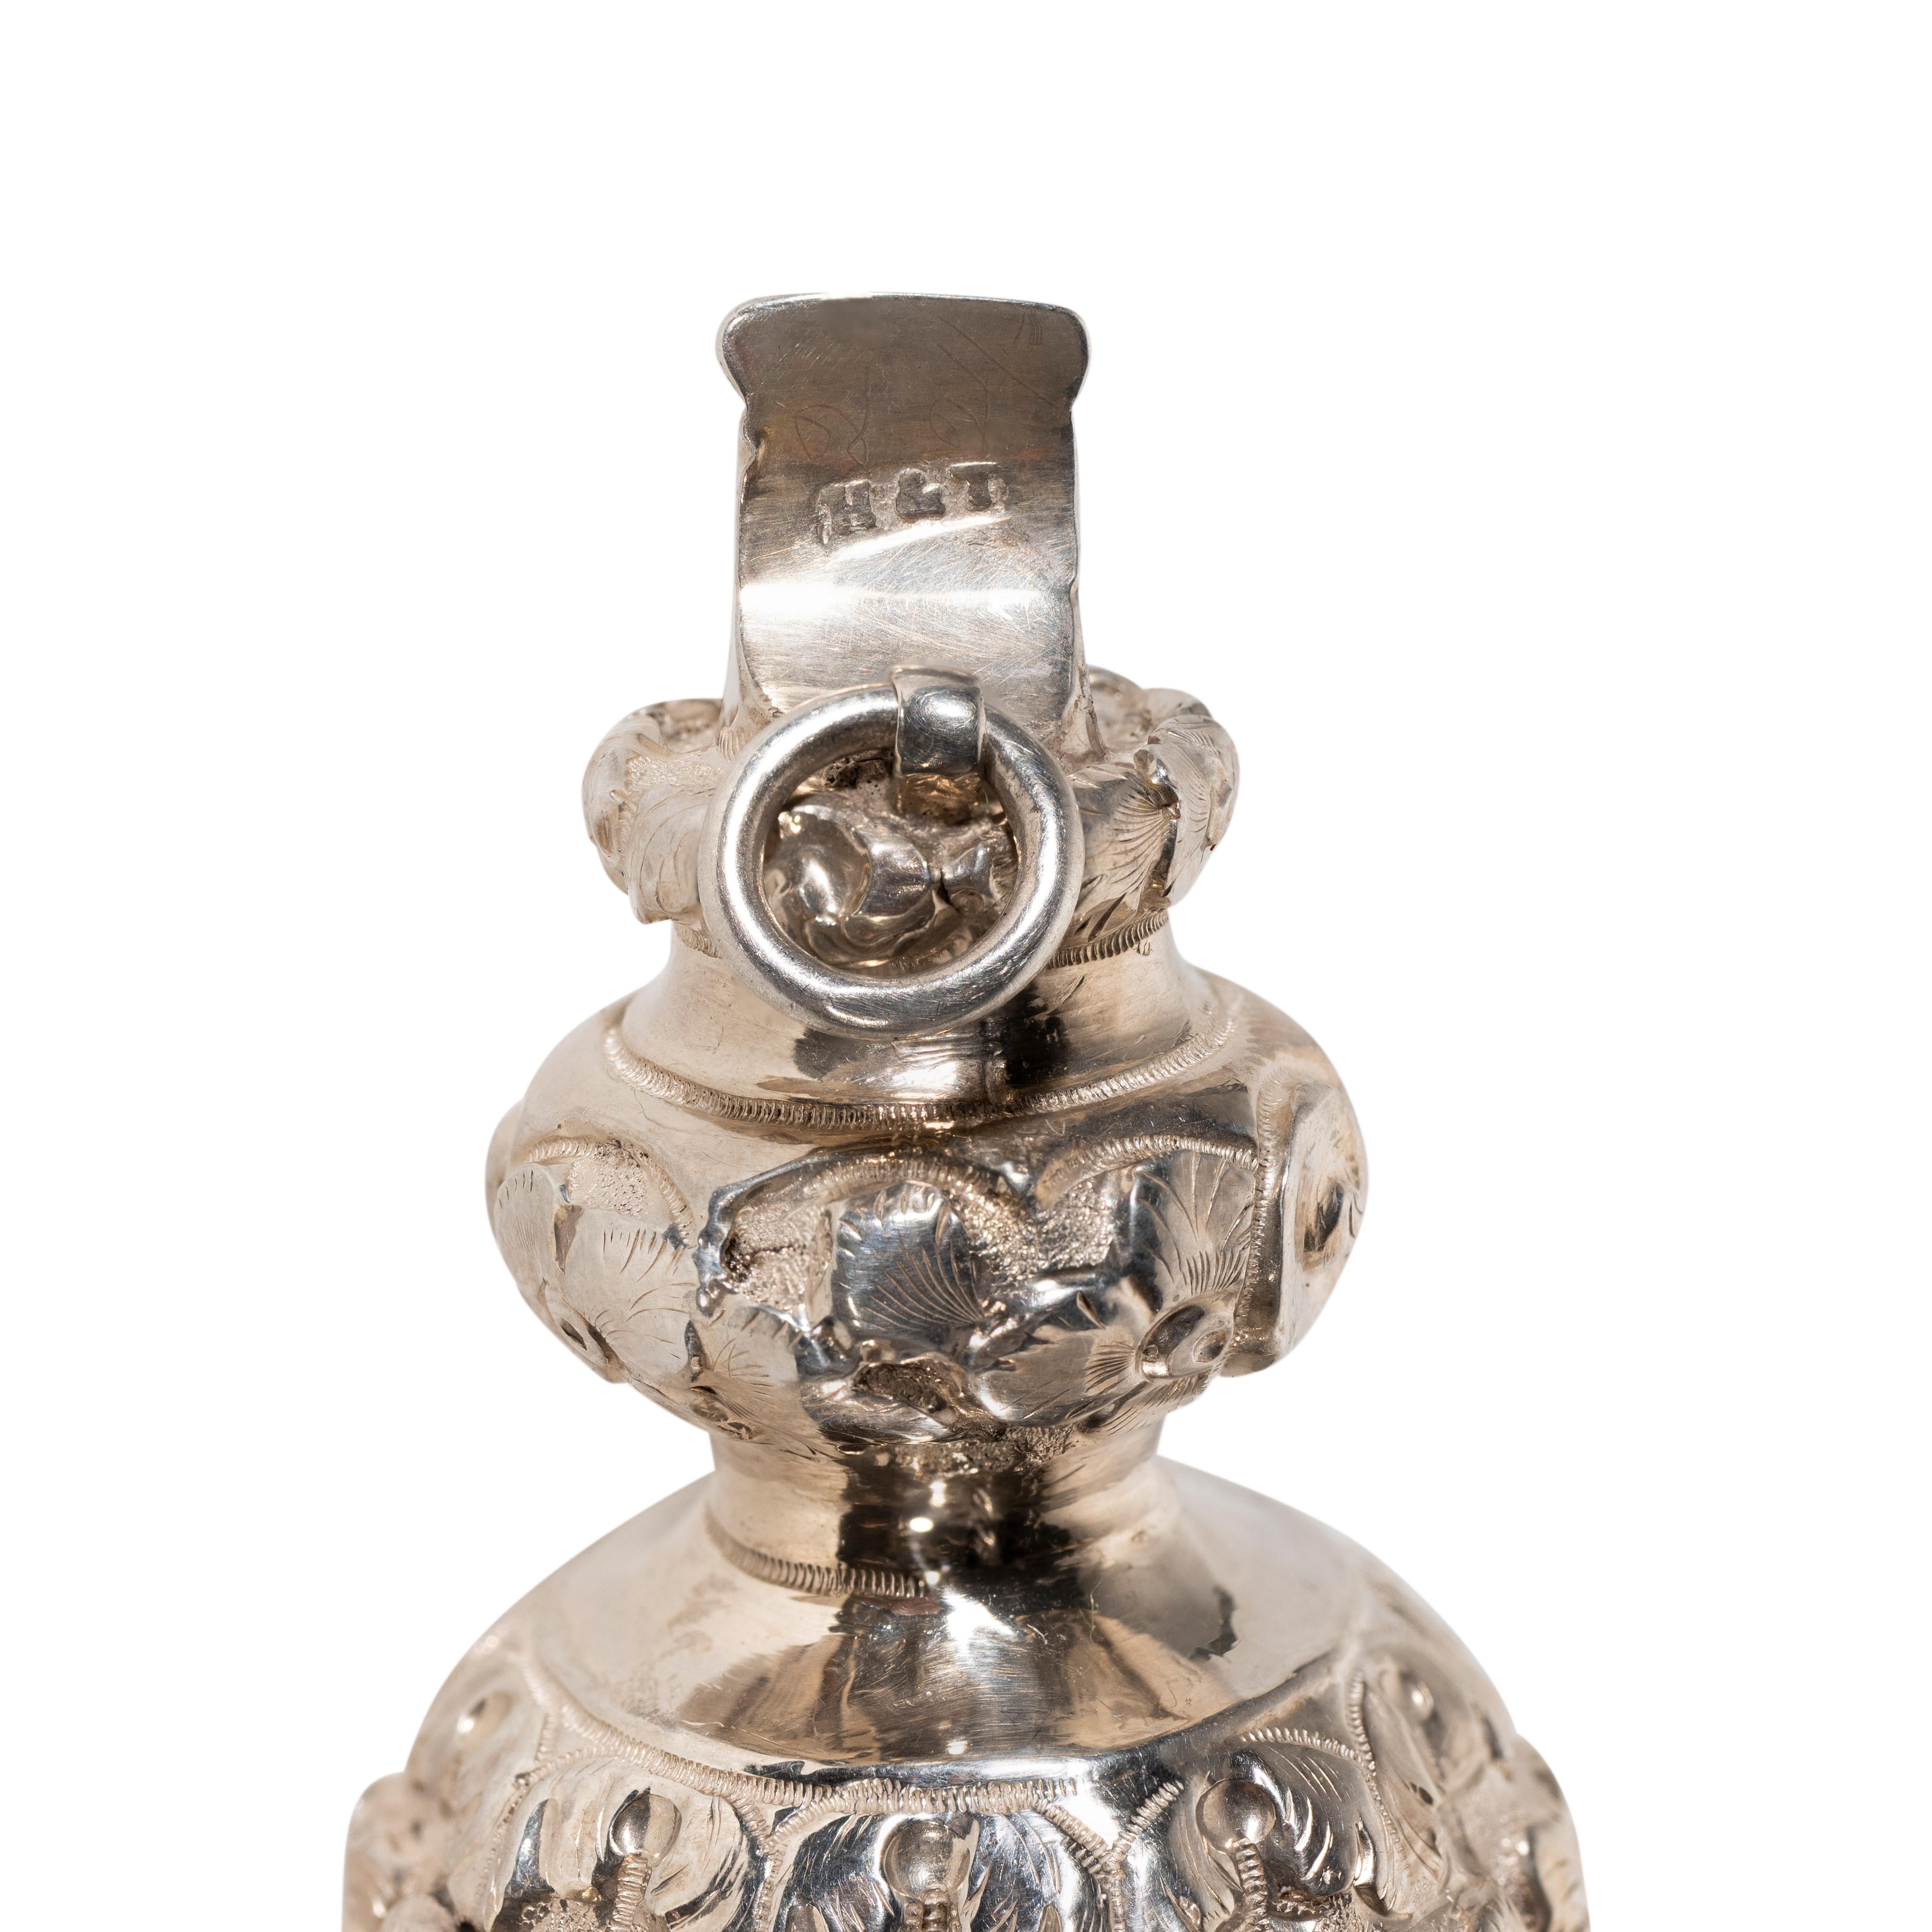 Exceptional antique Victorian sterling silver baby rattle and whistle has a bulbous shaped form. The surface of the tiered body is embellished with impressive embossed leaf decoration. The impressive antique silver rattle is fitted with seven